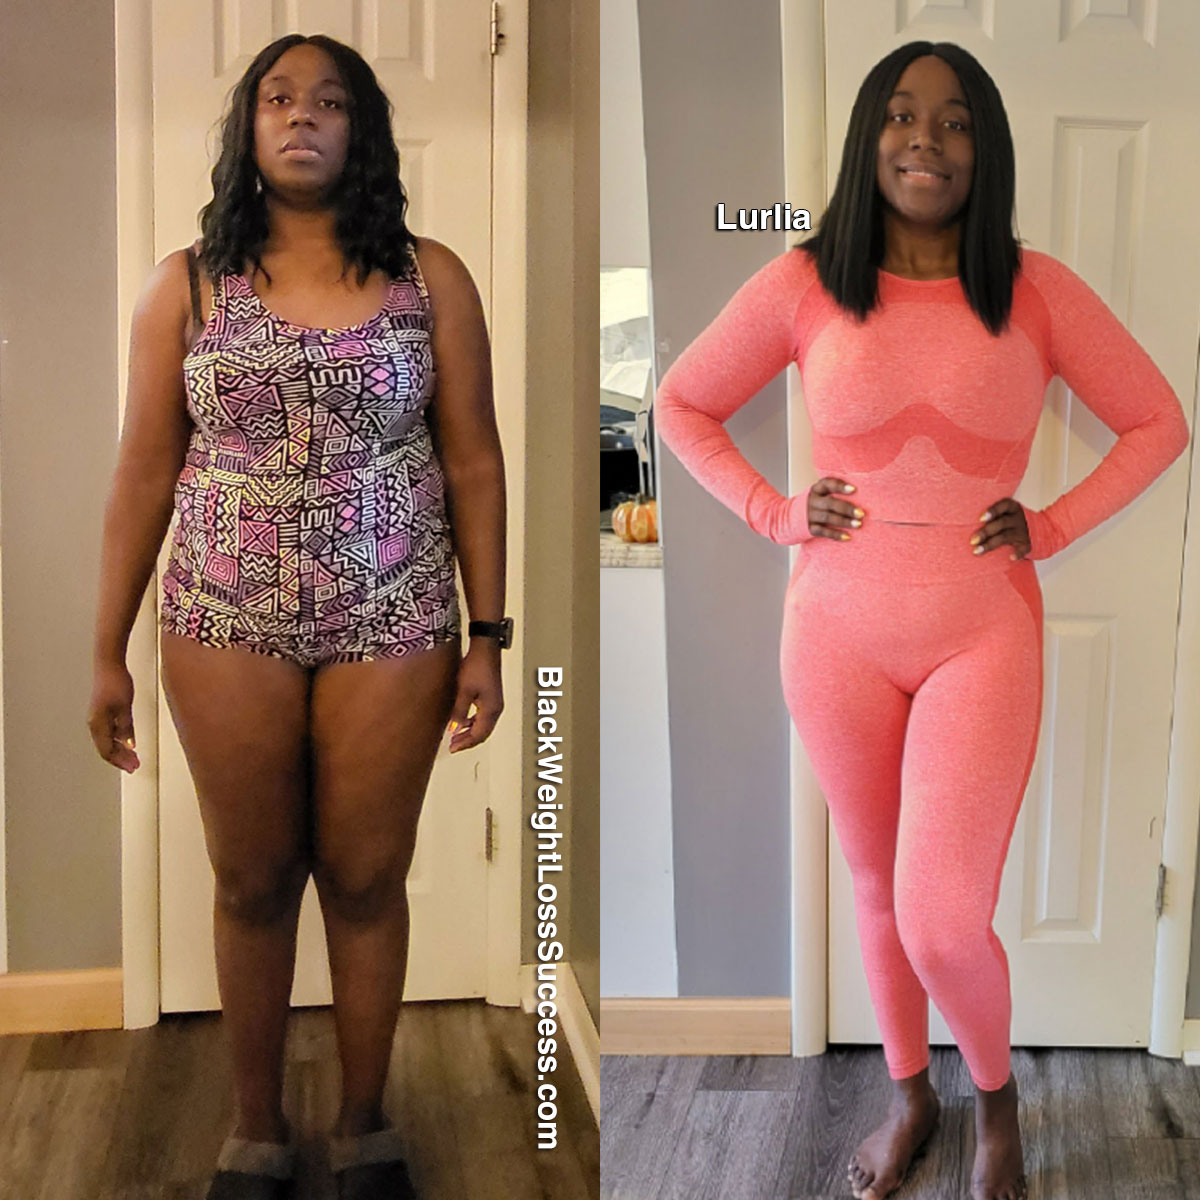 Lurlia before and after weight loss